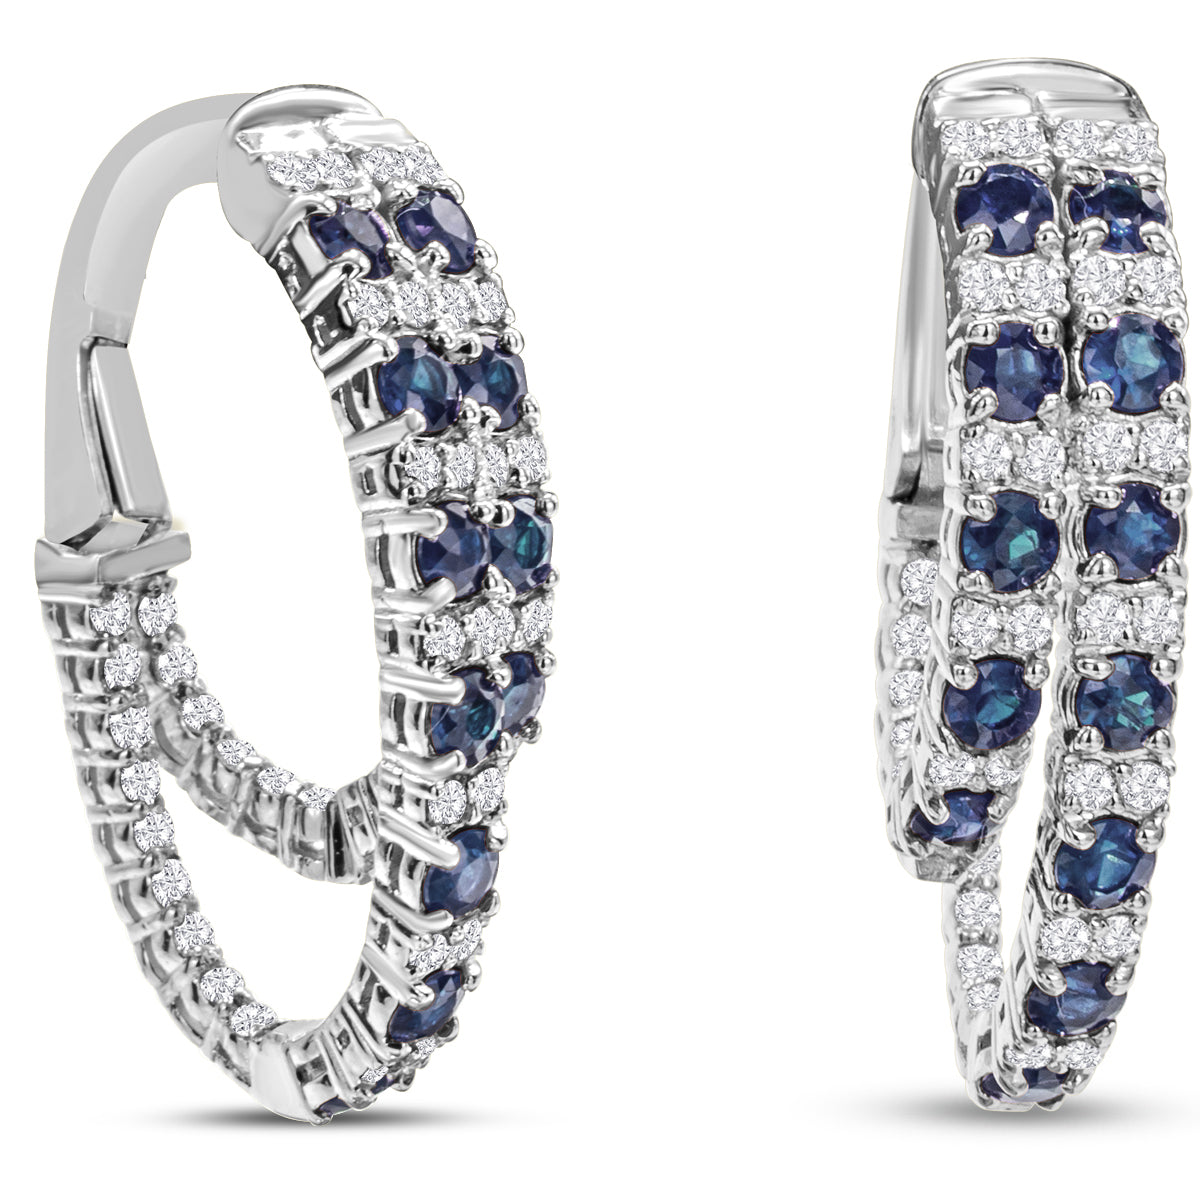 Sselects 2 1/2 Carat Sapphire And Diamond Hoop Earrings In 14 Karat White I-j, I1-i2 In Gold